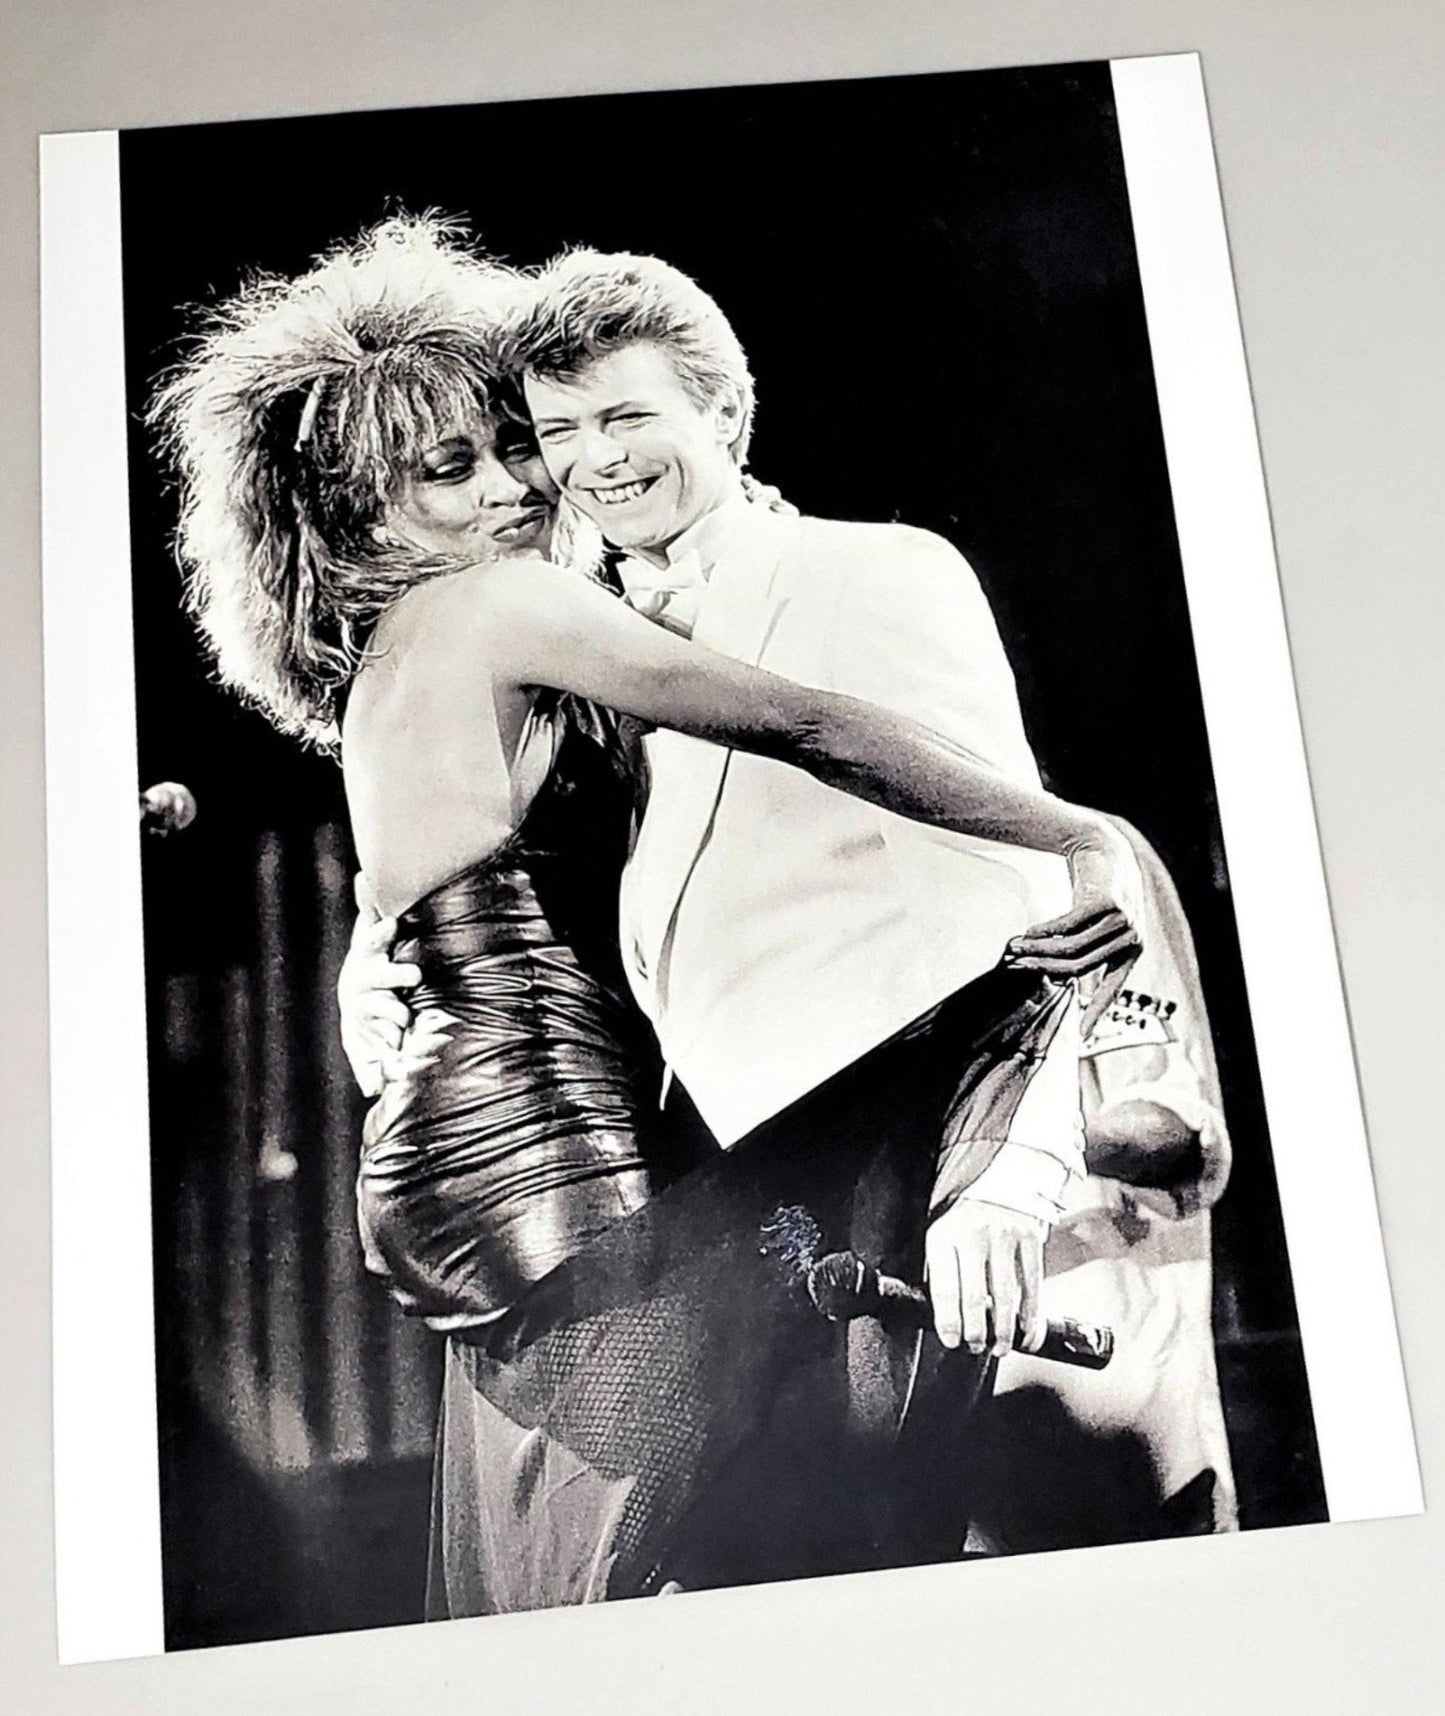 Original photograph page of Bowie & Tina Turner featured in 2010 David Bowie book by Jeff Hudson